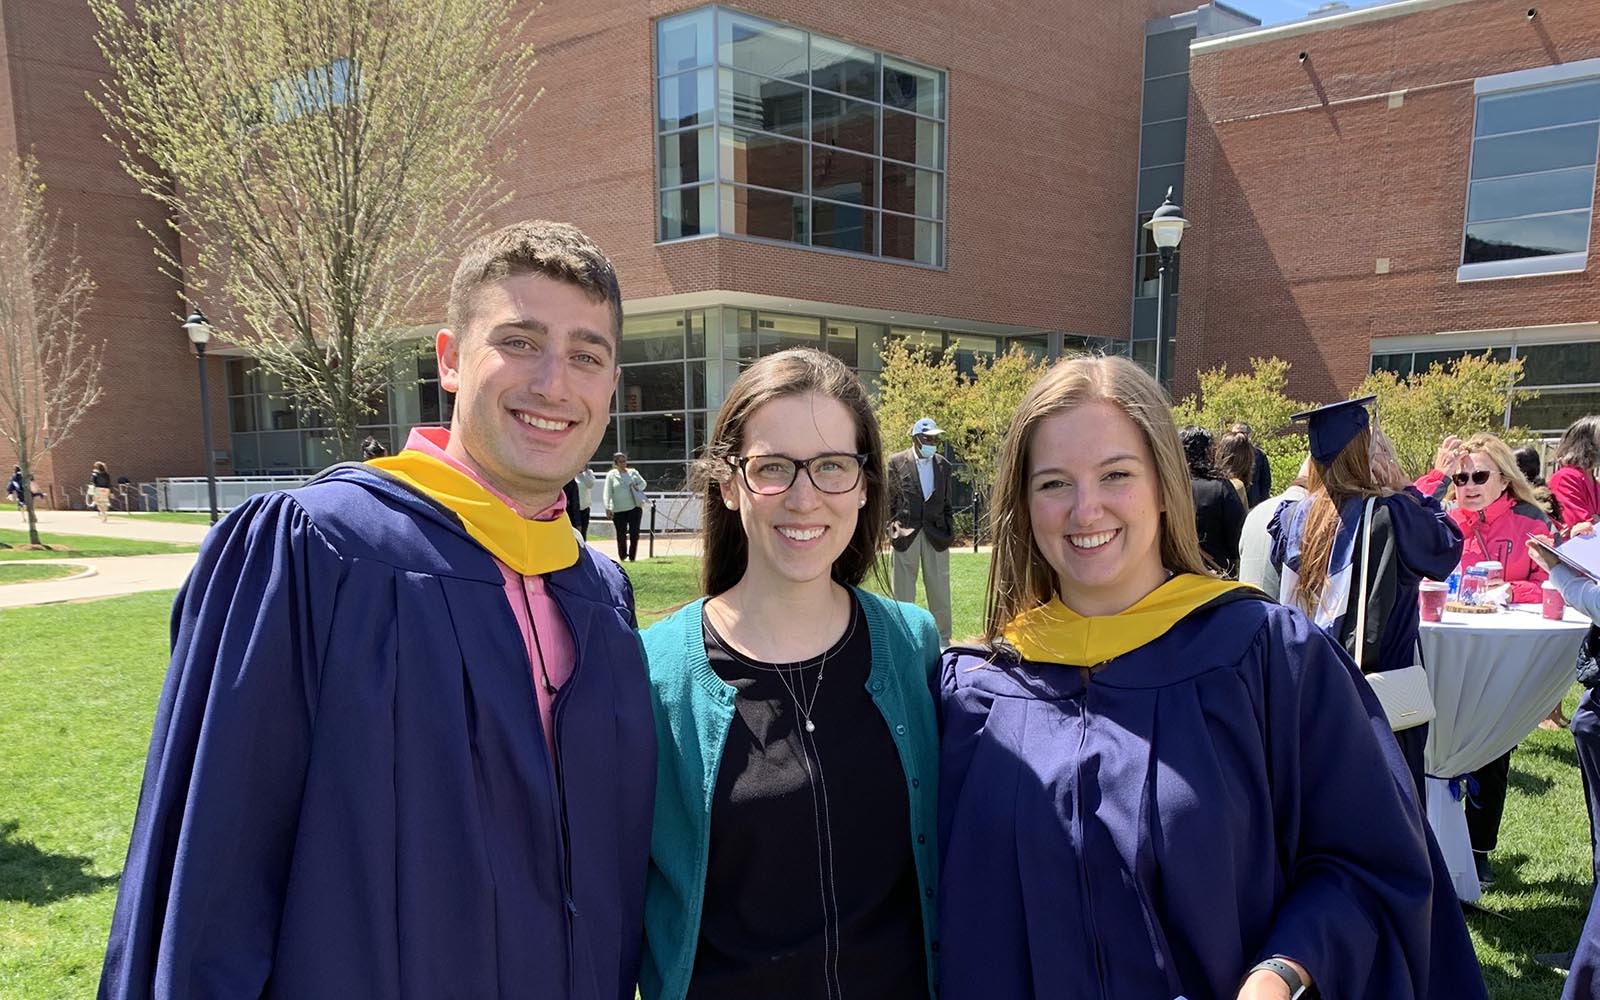 Erin Leigh (center) poses with Zachary Solomon (left) and Lily Jackson (right) as they earn their Master of Science degrees in Accounting. Erin was awarded the Career Mentor of the Year award by the Provost's Office.    (Contributed Photo)